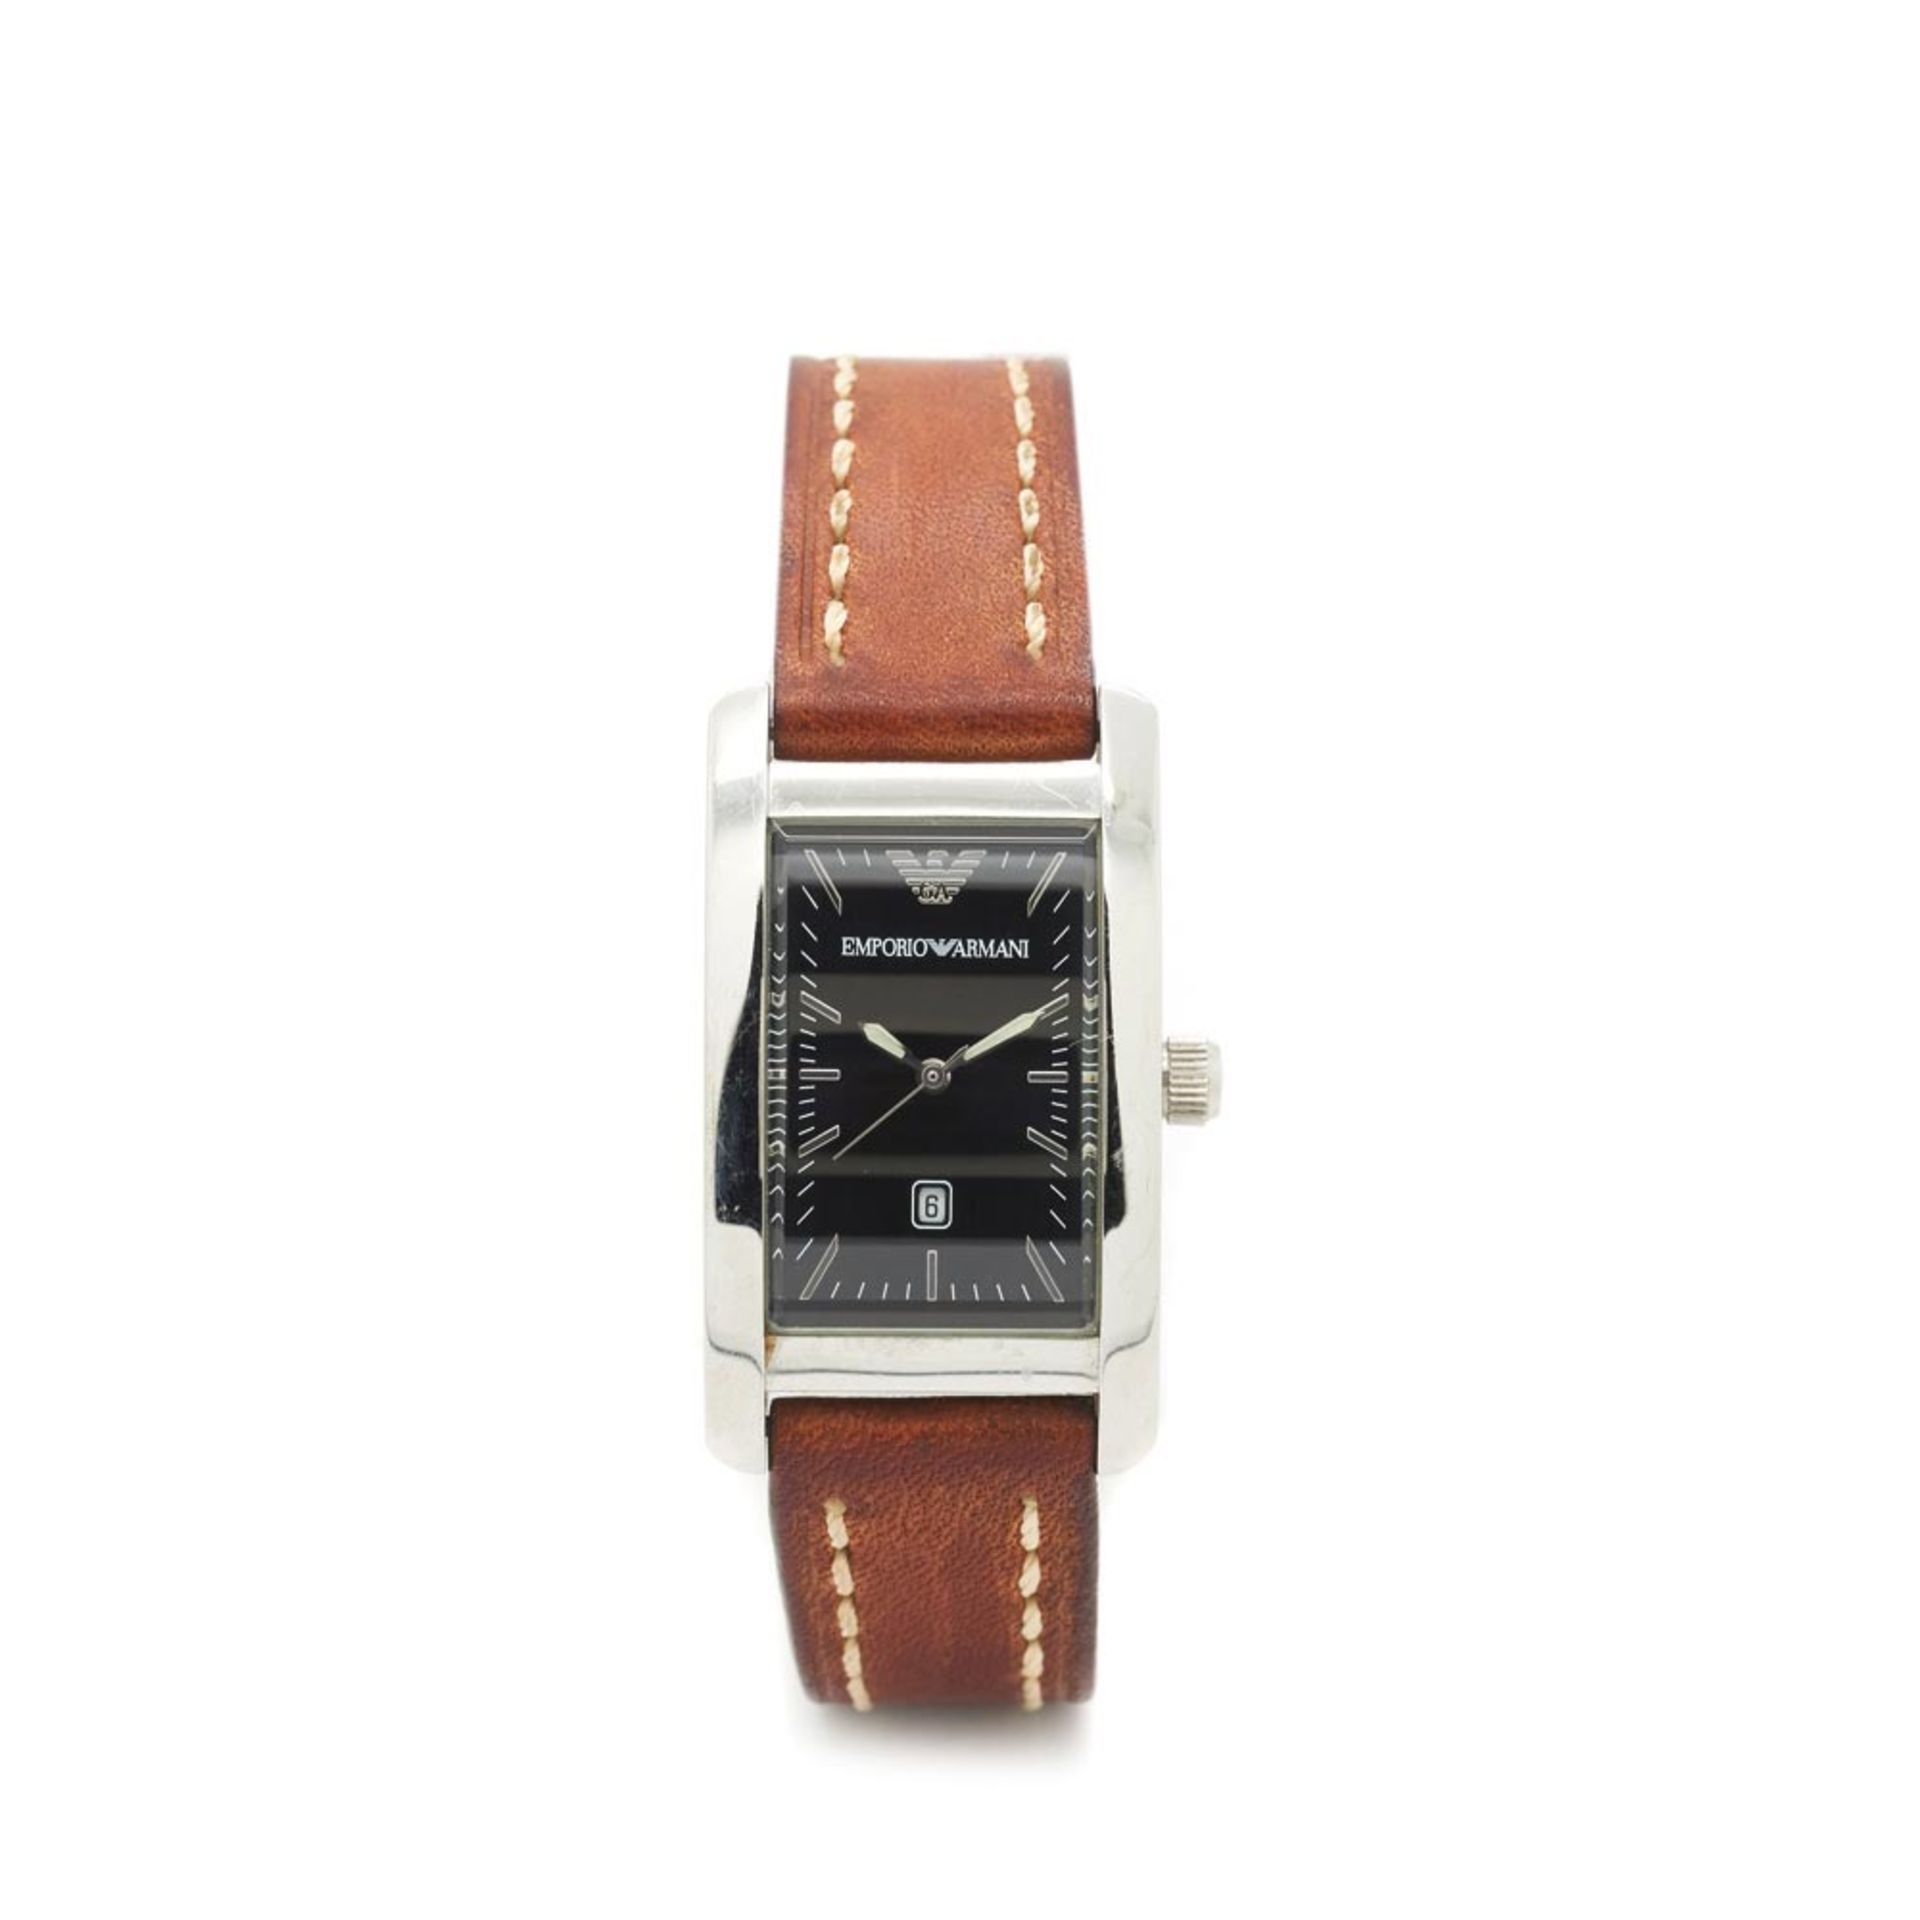 Emporio Armani steel and leather wristwatch